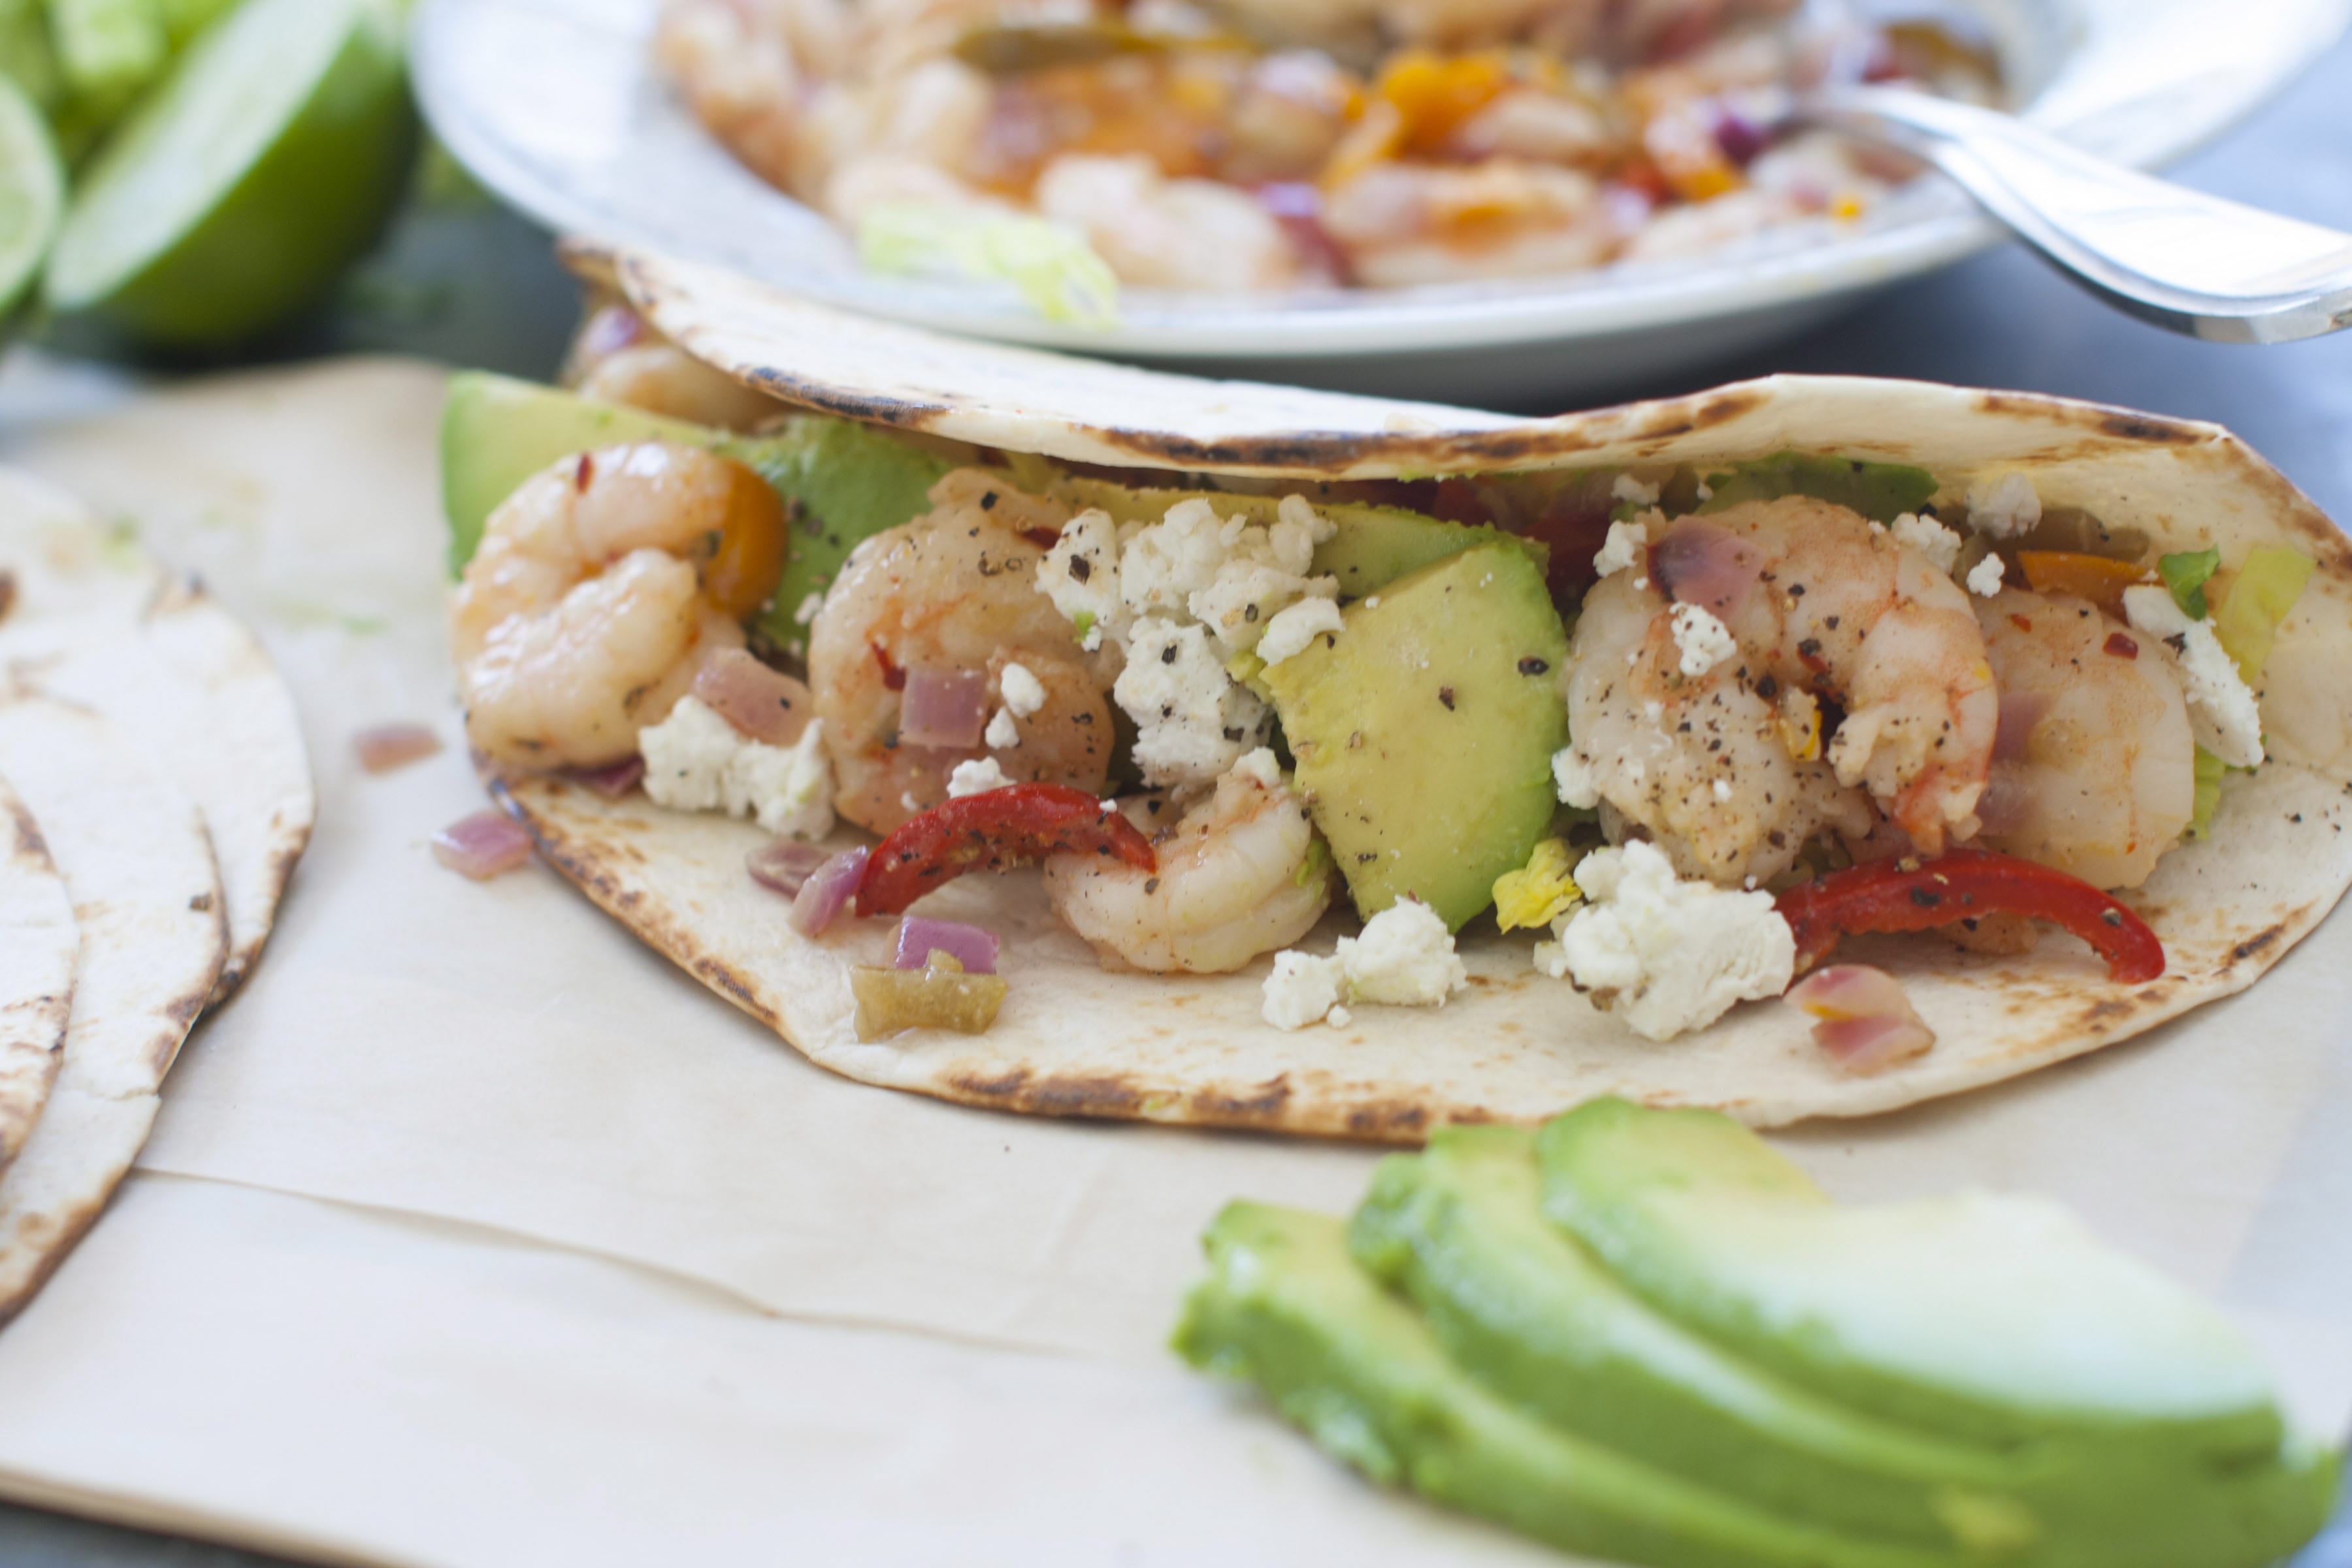 Shrimp tacos faster than a call for pizza - The Columbian